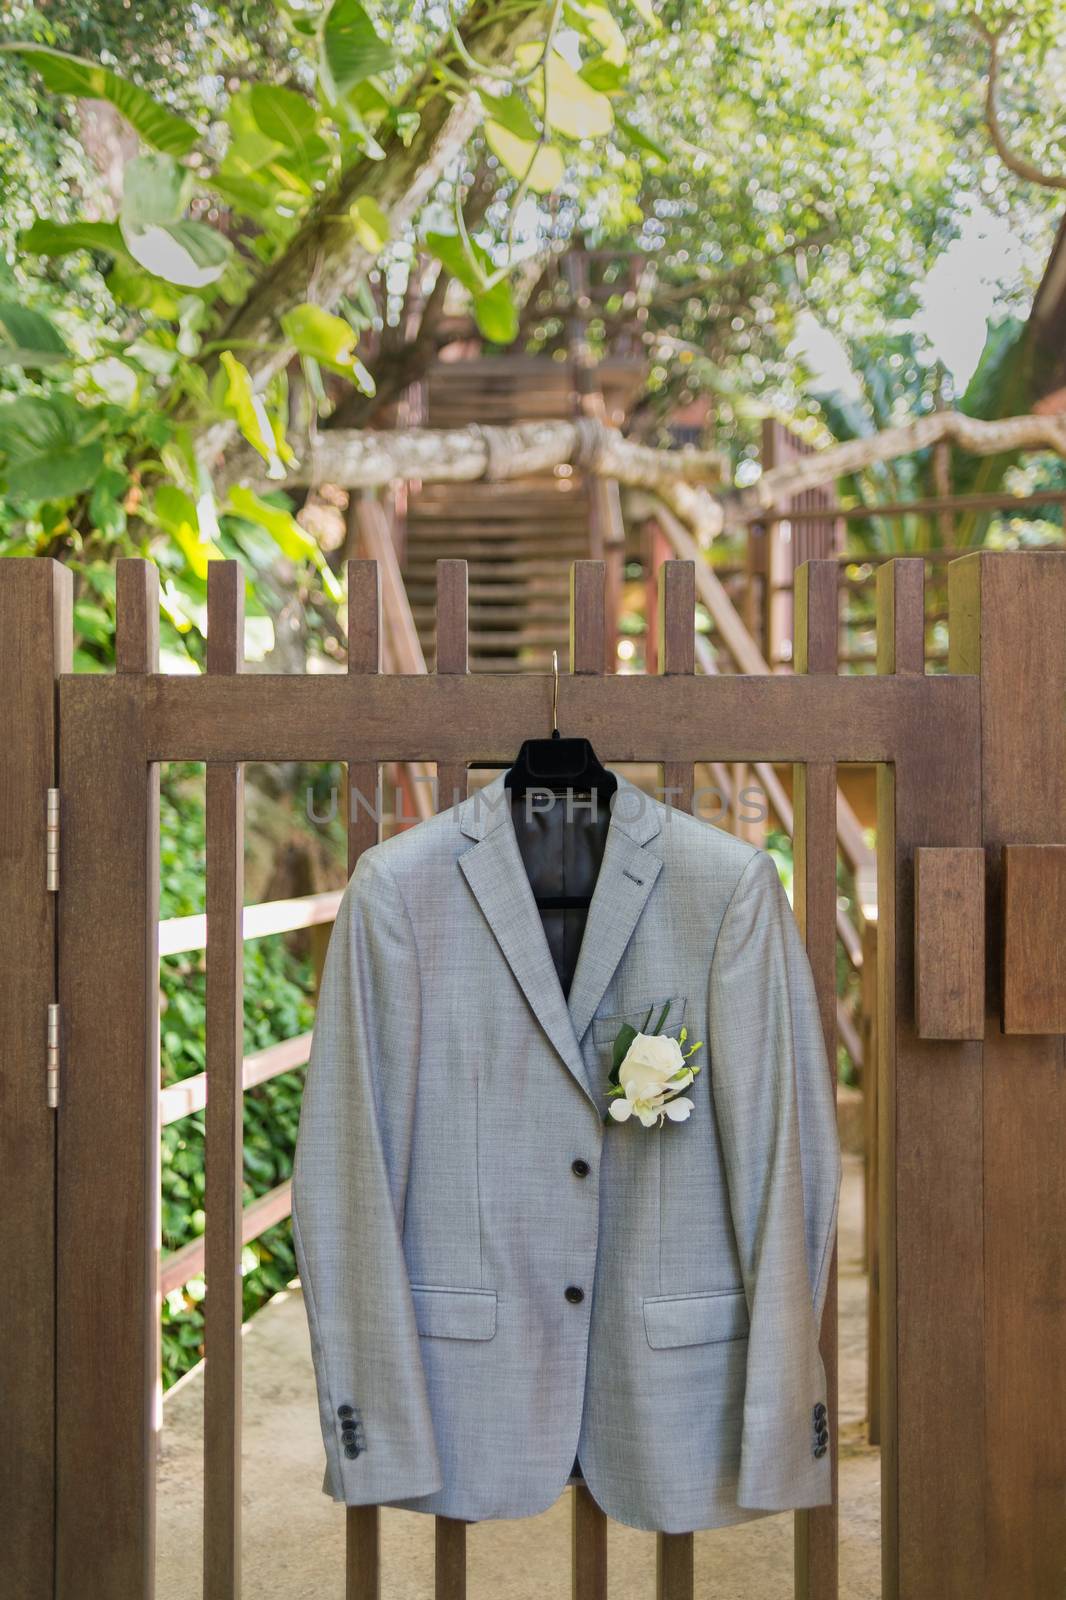 Grooms jacket hanging by fence.